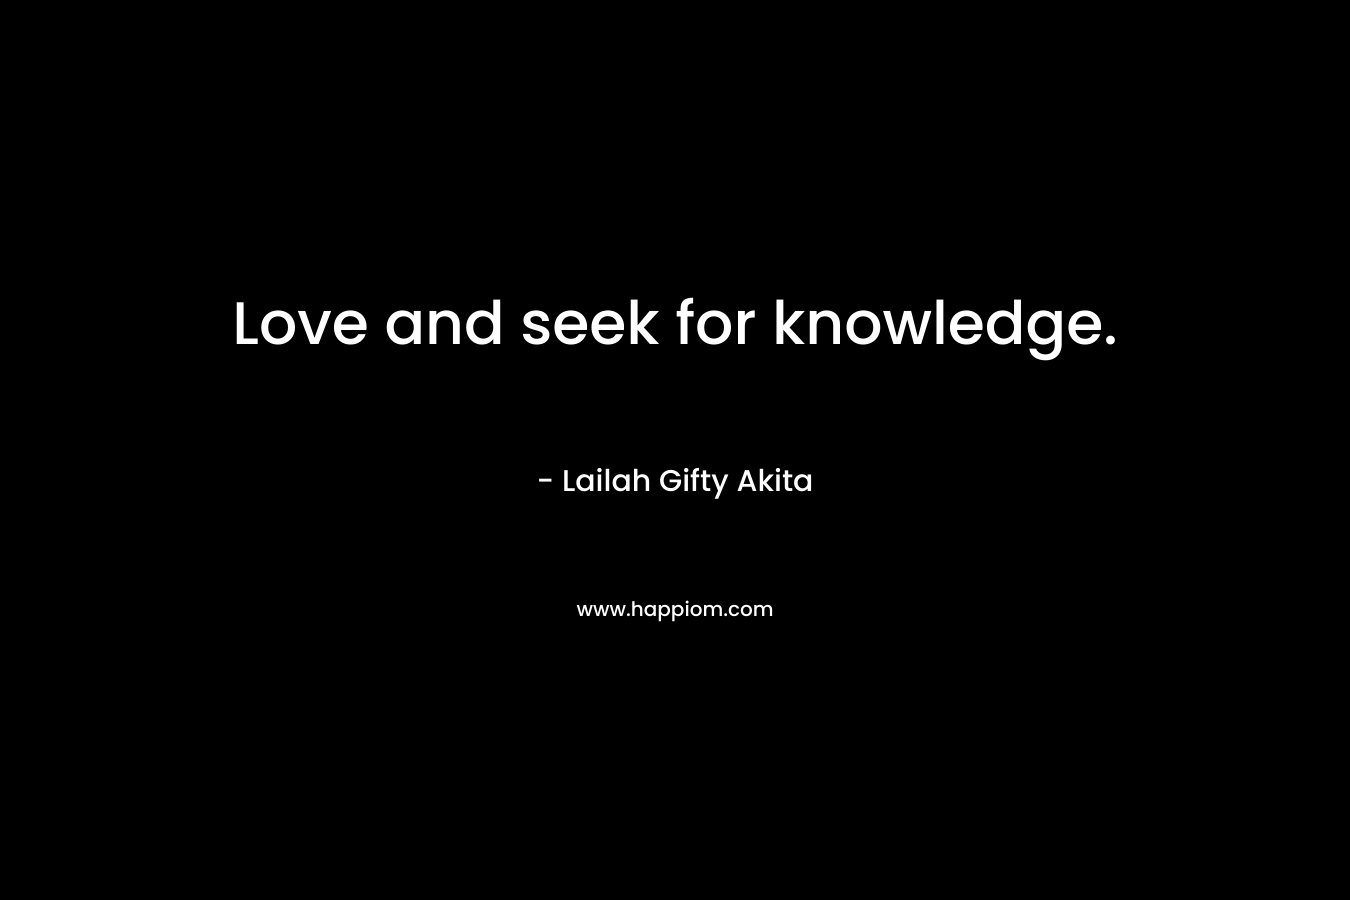 Love and seek for knowledge.